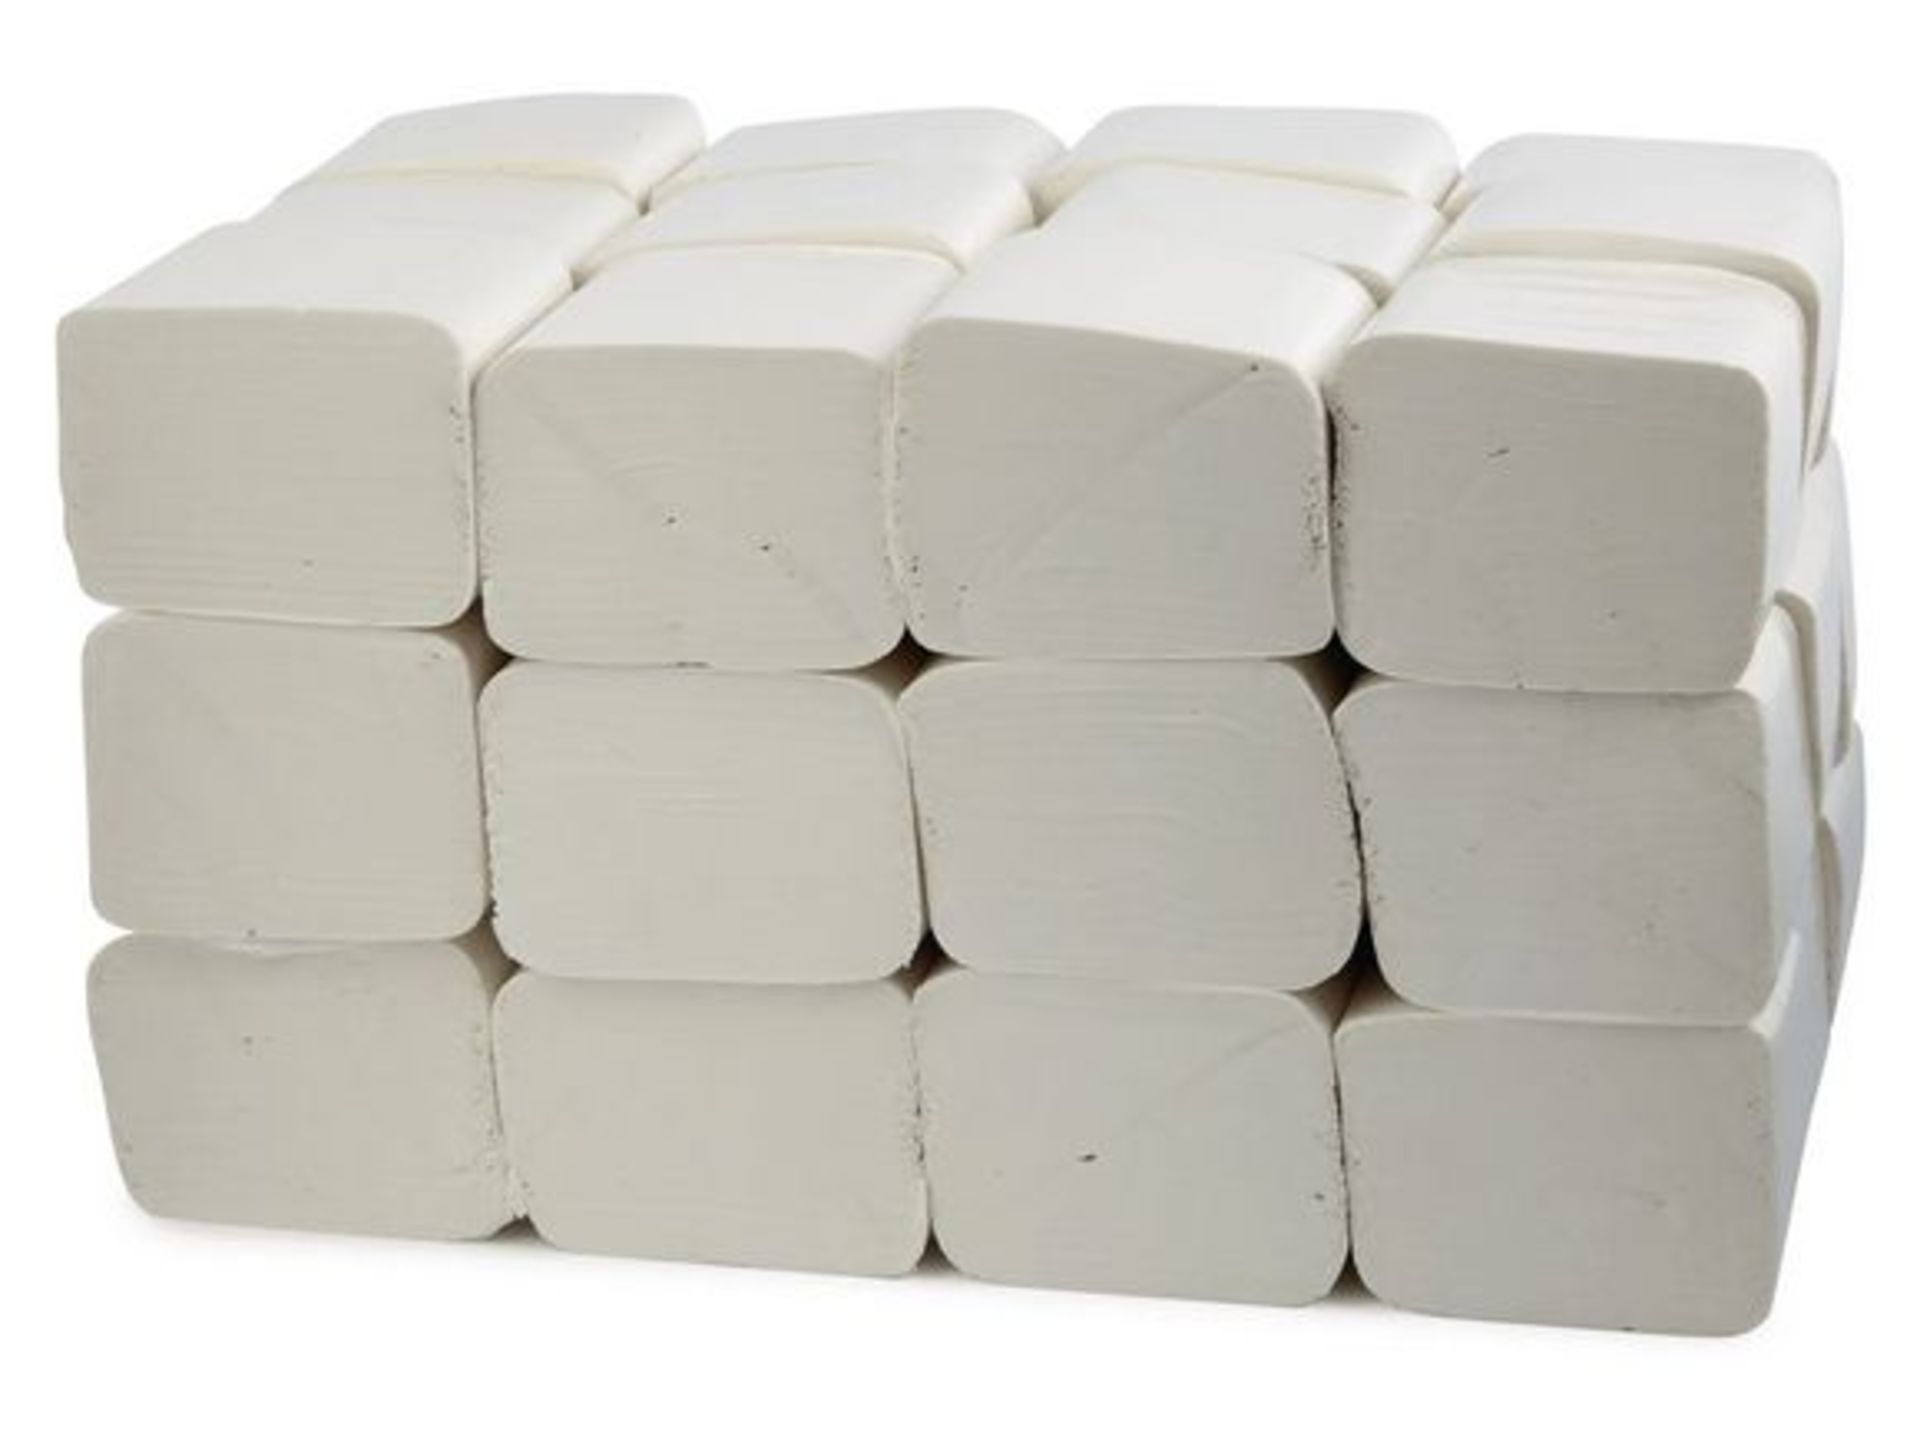 TRADE LOT 25 X BRAND NEW PACKS OF 36 2PLY TOILET TISSUE R10